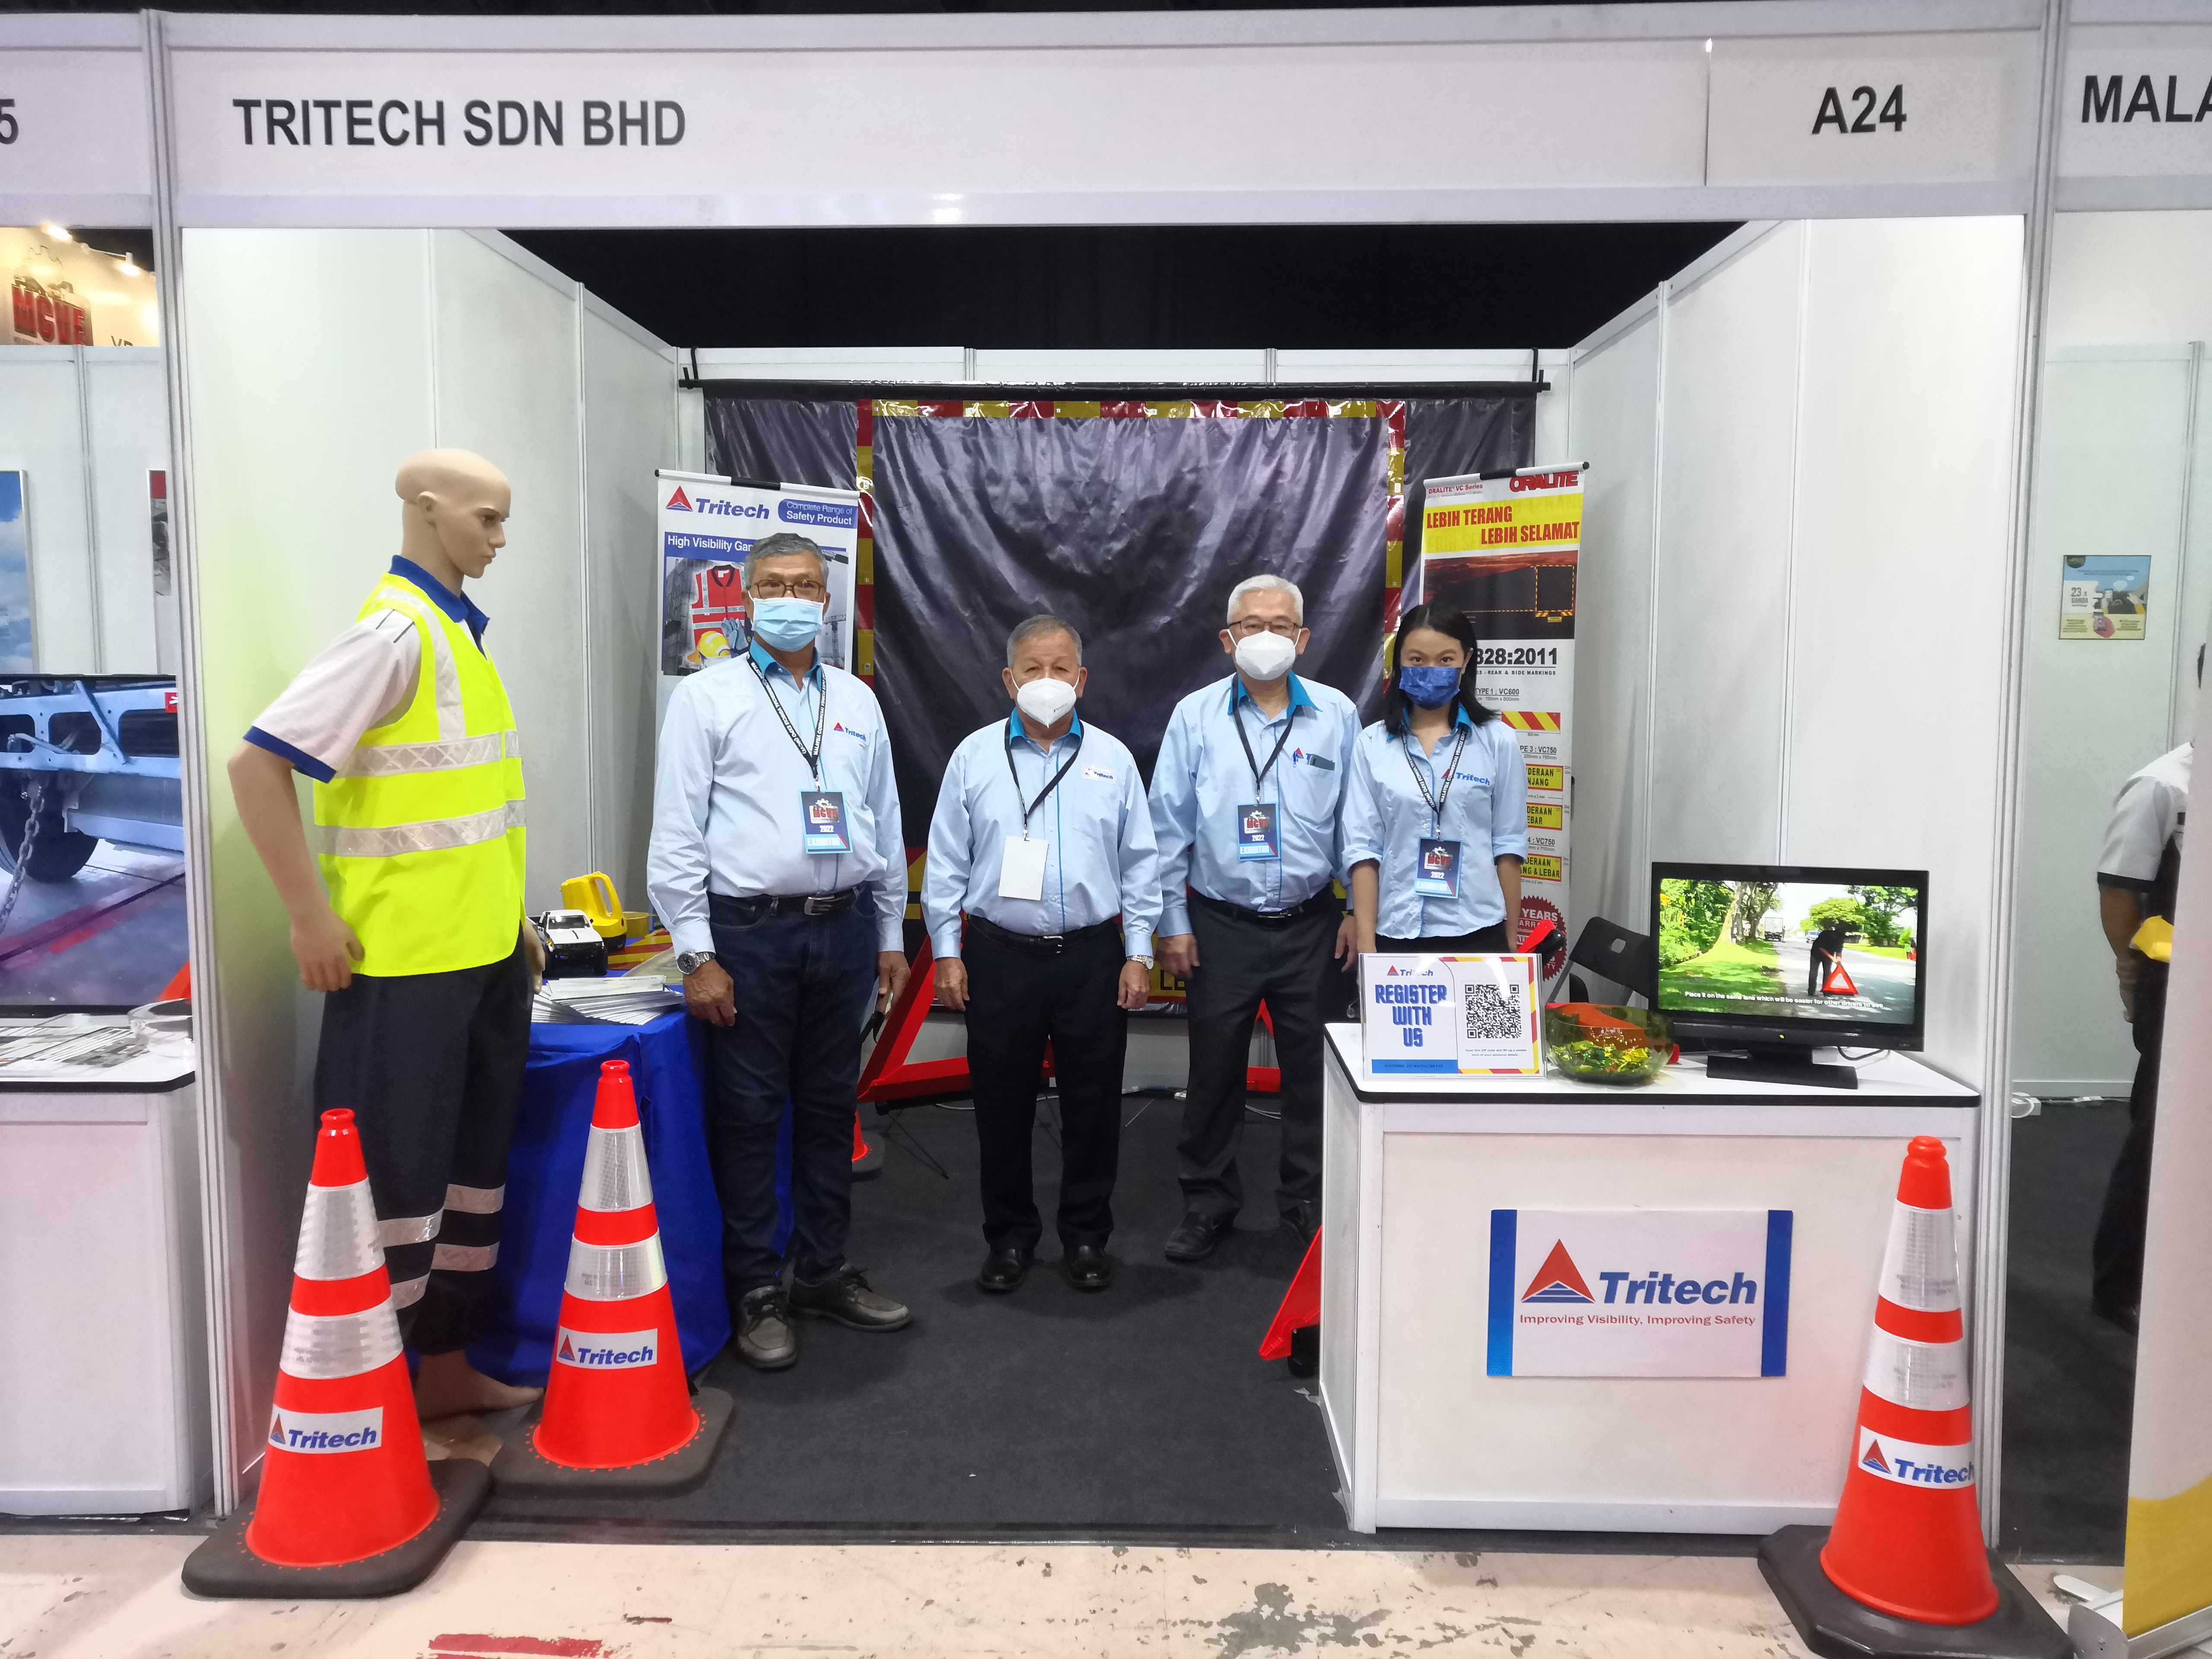 Tritech’s booth at MCVE